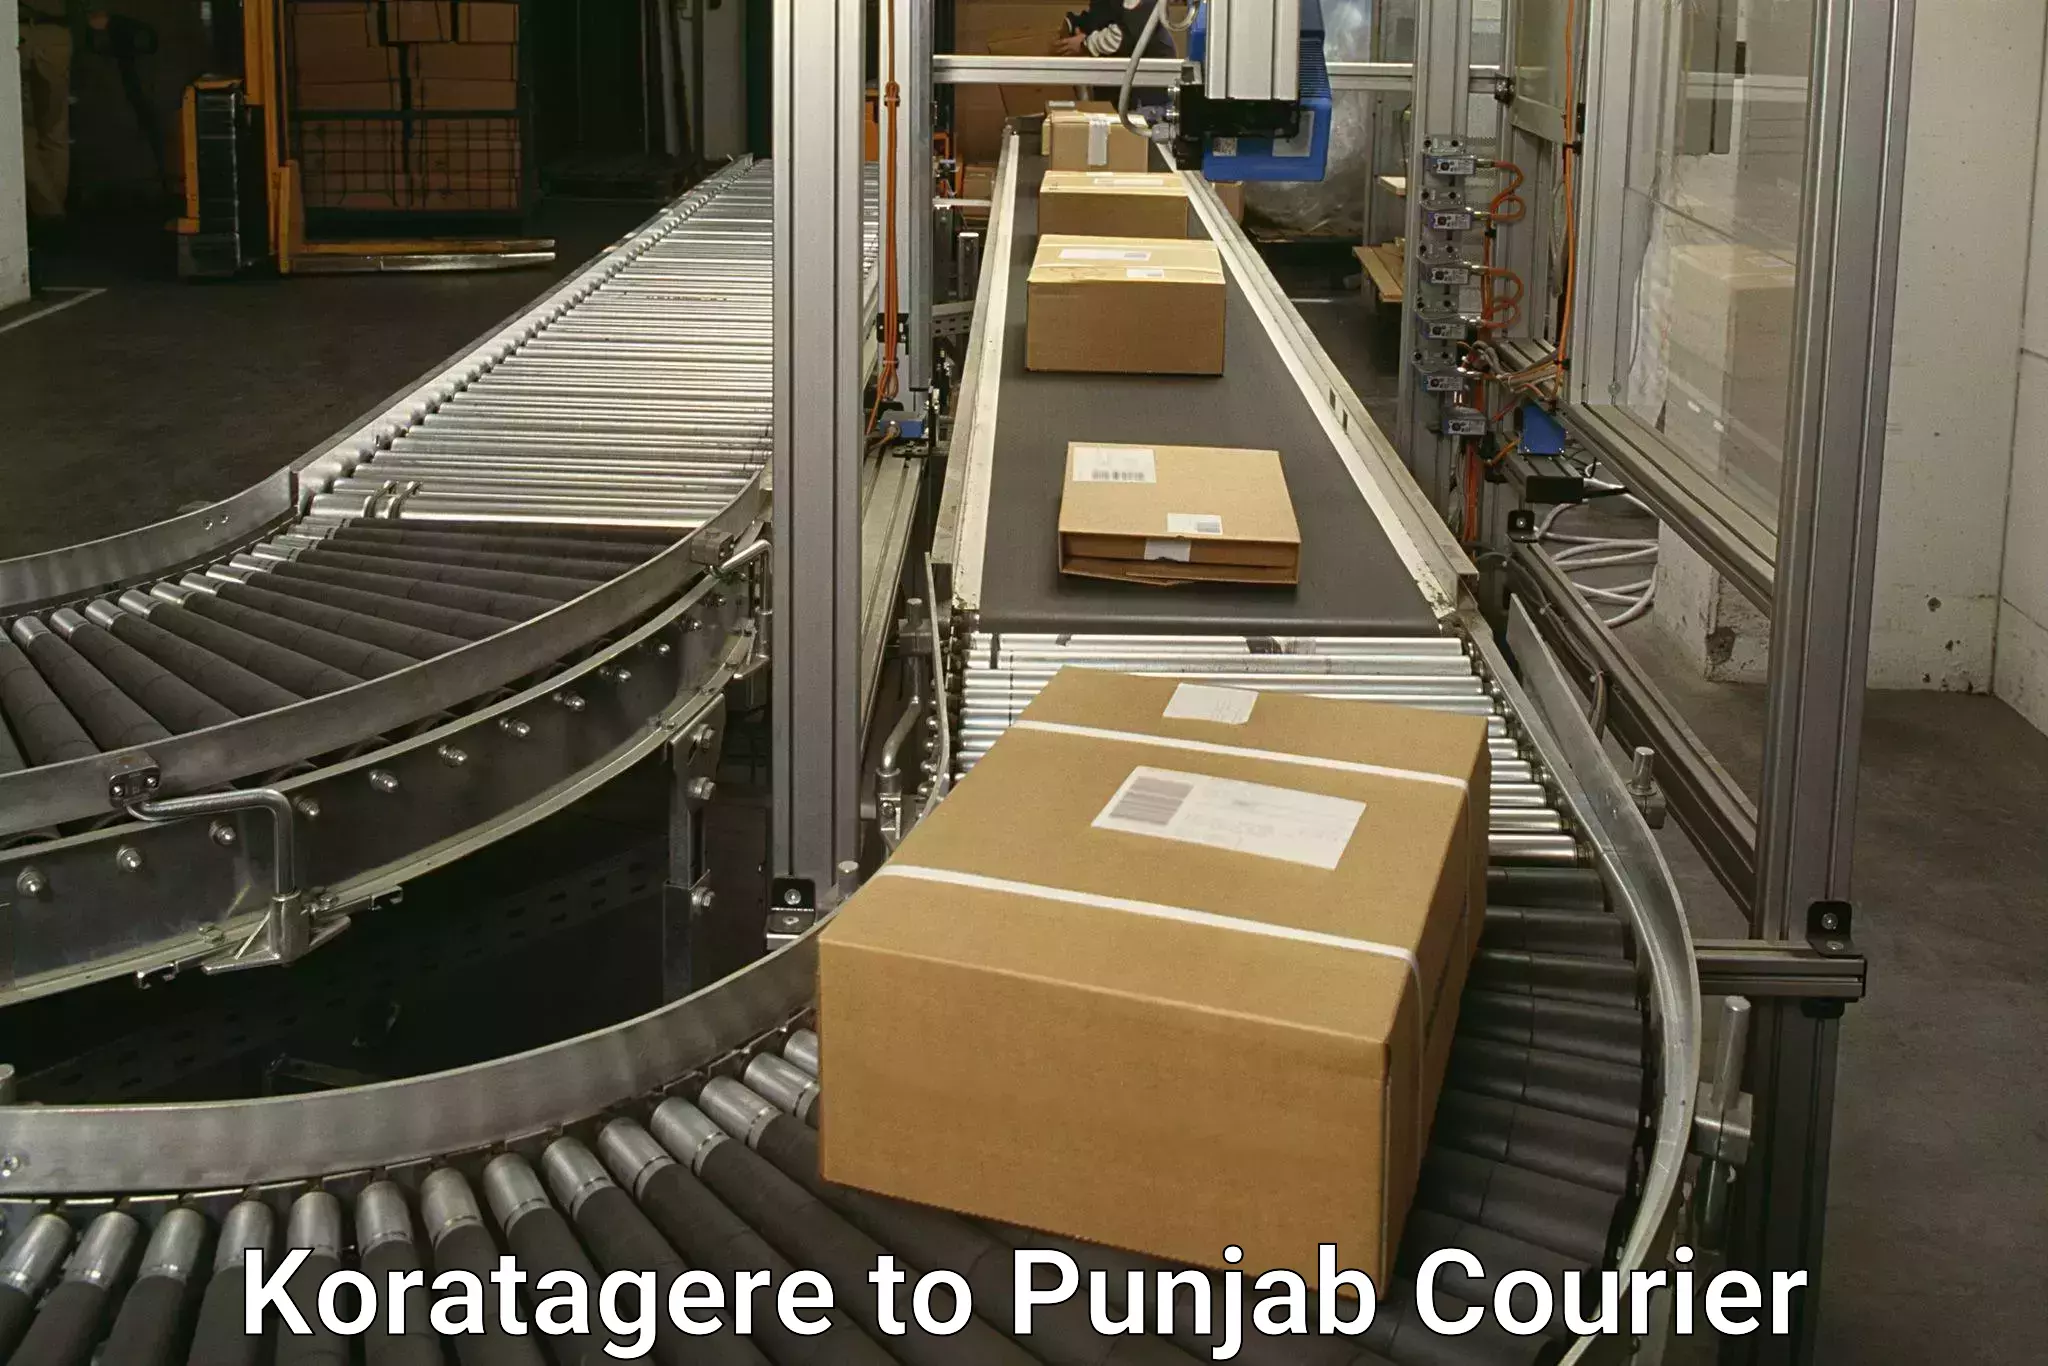 Multi-national courier services Koratagere to Khanna